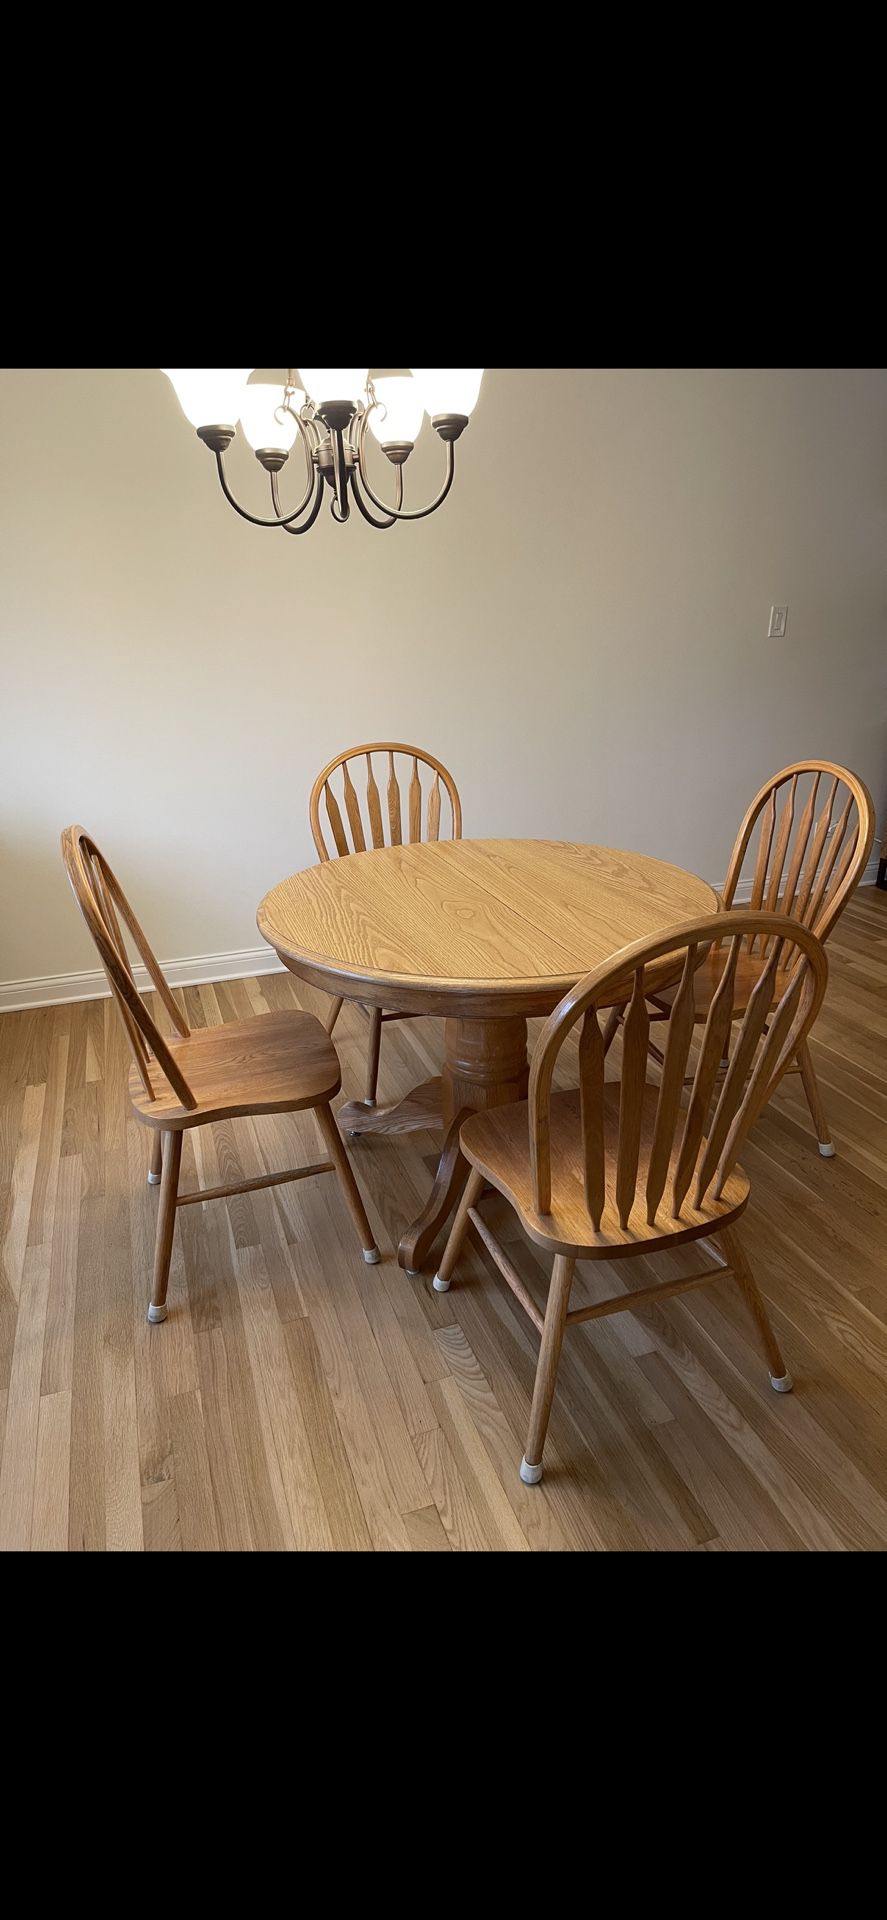 Solid Wood Table With Extended Leaf And 4 Chairs